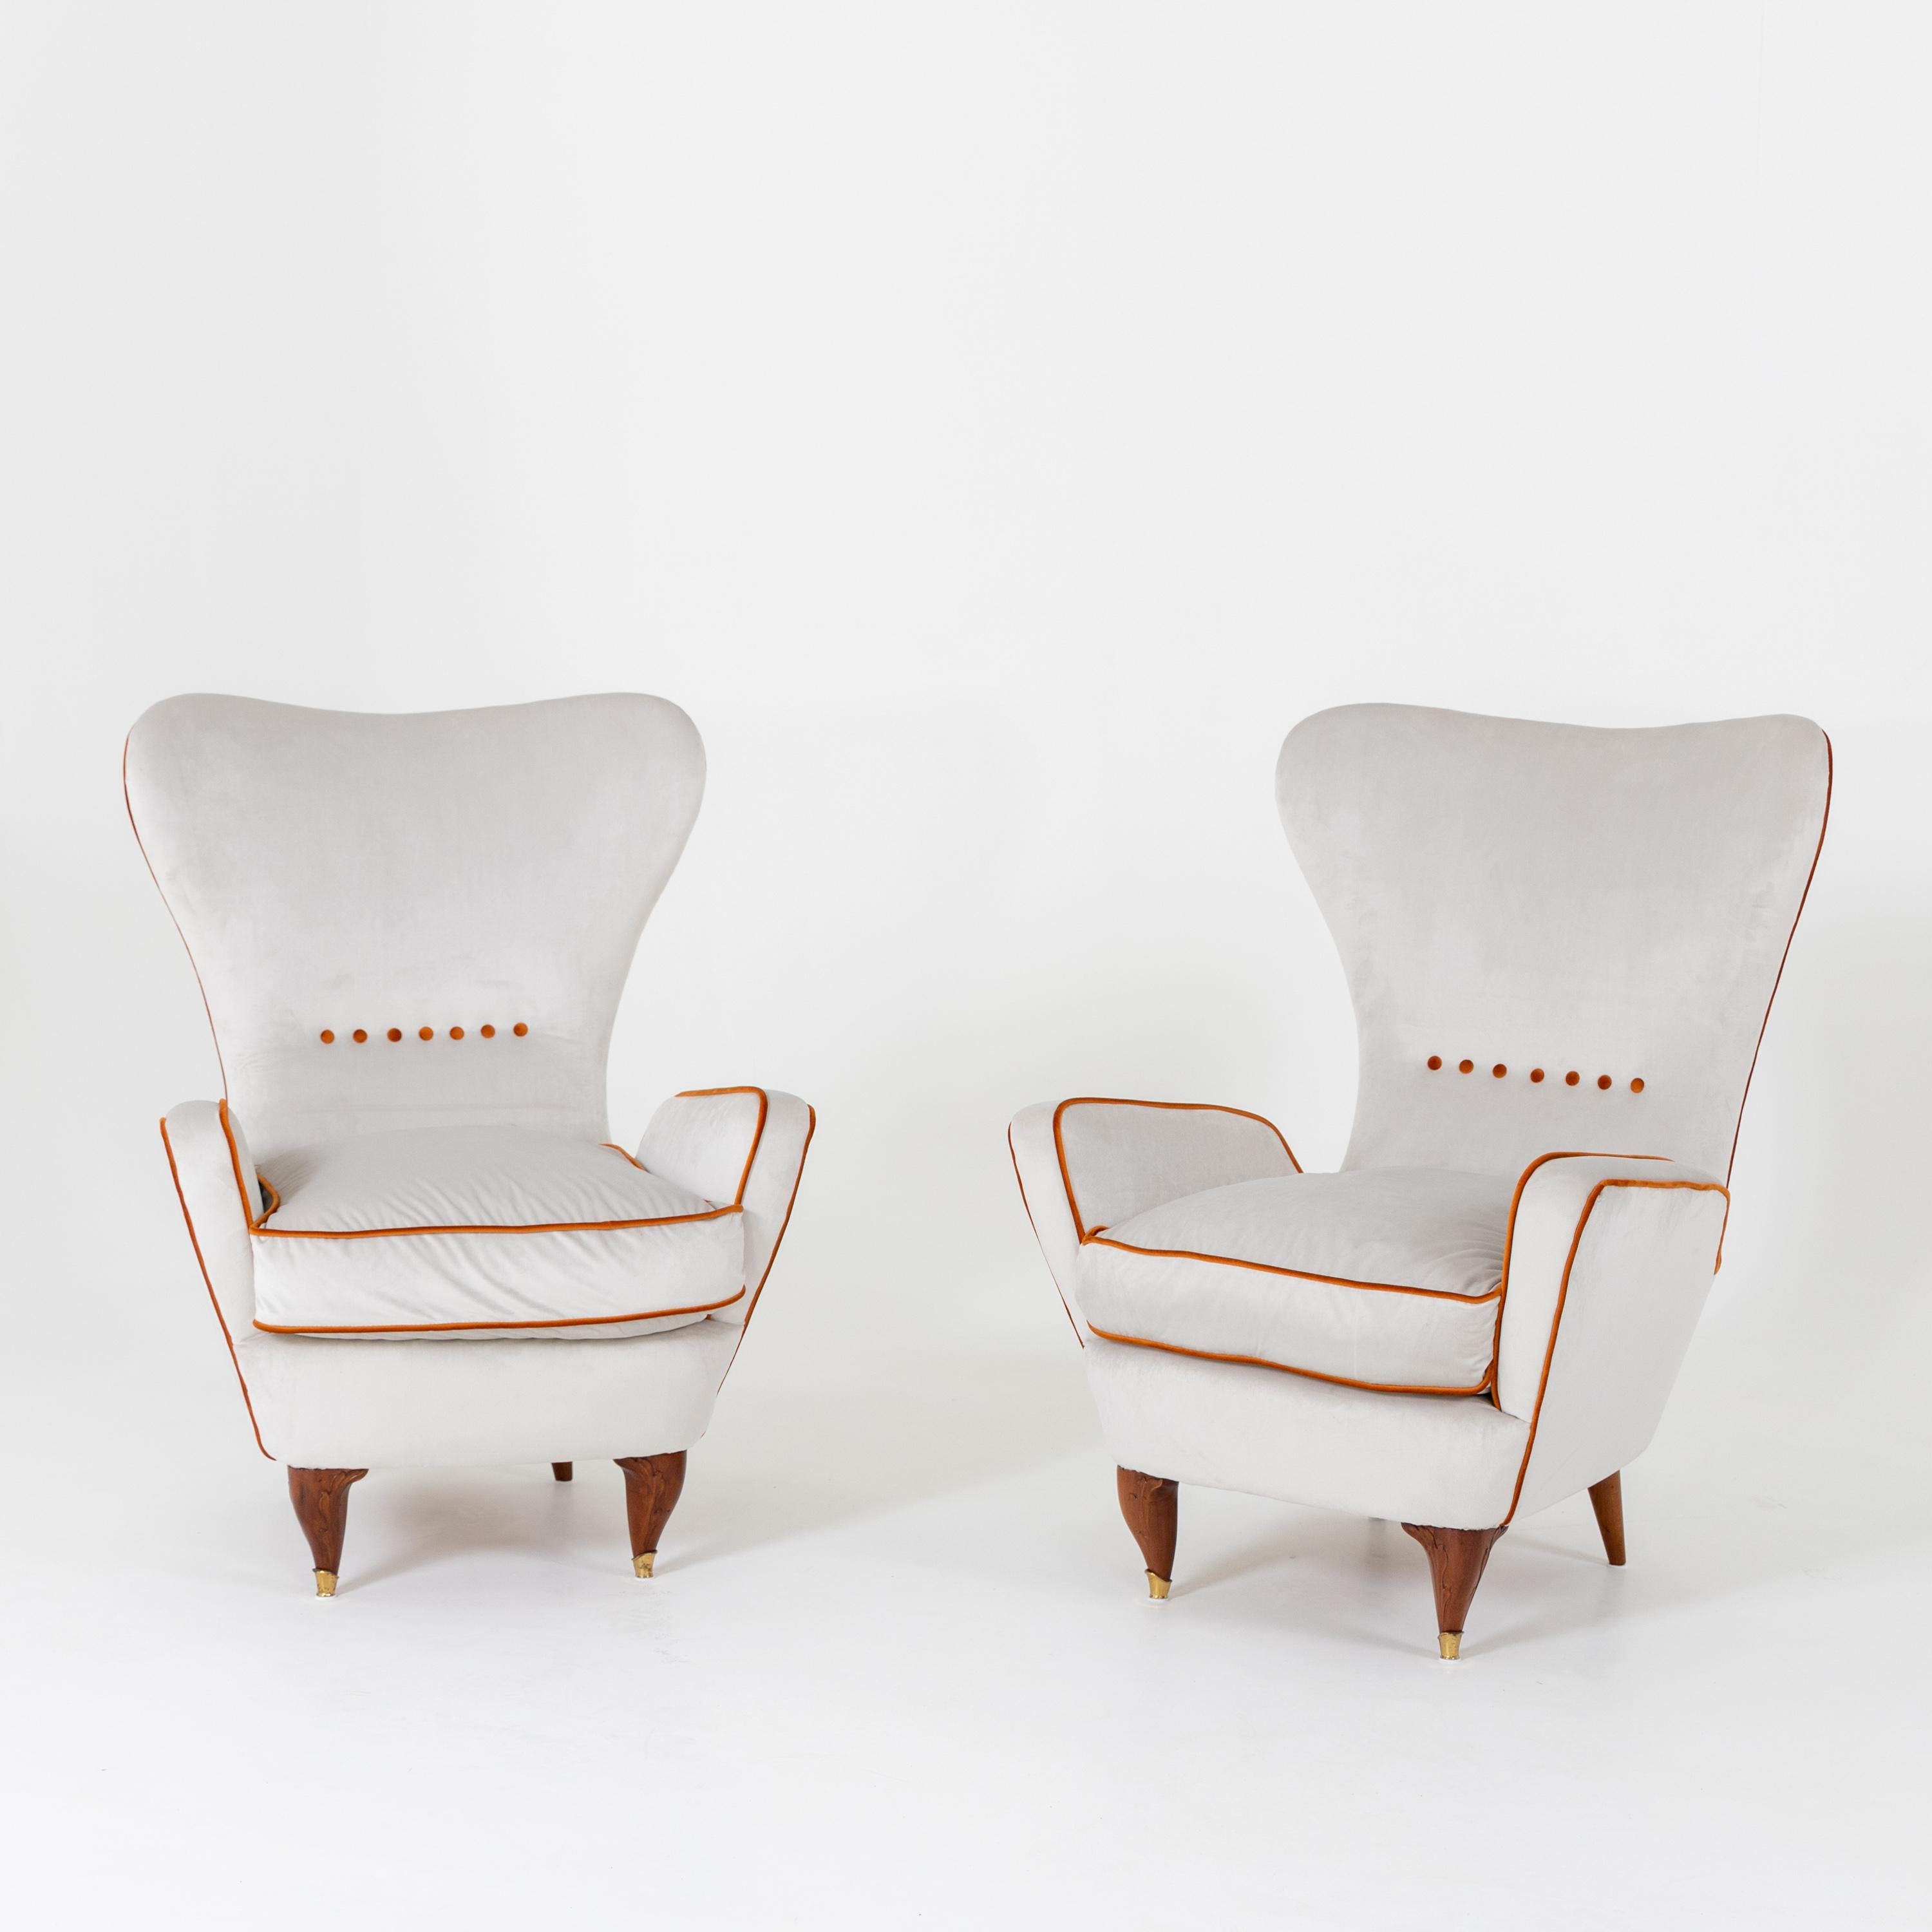 Pair of lounge armchairs with wide trapezoidal backs and thickly upholstered seat and armrests, designed by Paolo Buffa in the 1950s. The armrests leave a small gap to the backrest, which gives the armchairs their unusual profile view. The armchairs